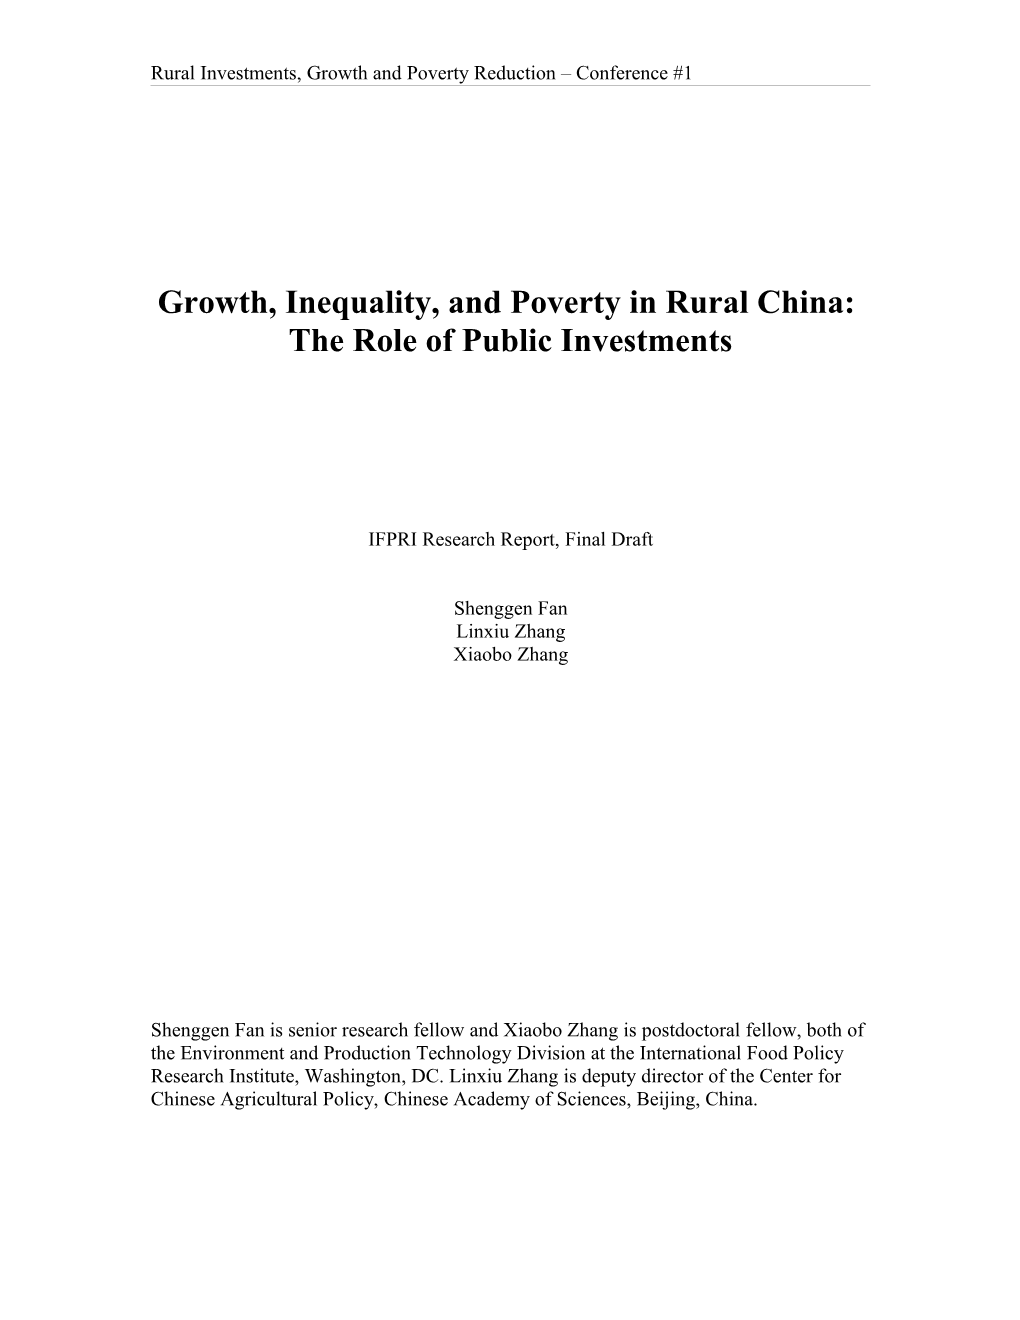 Growth, Inequality, and Poverty in Rural China